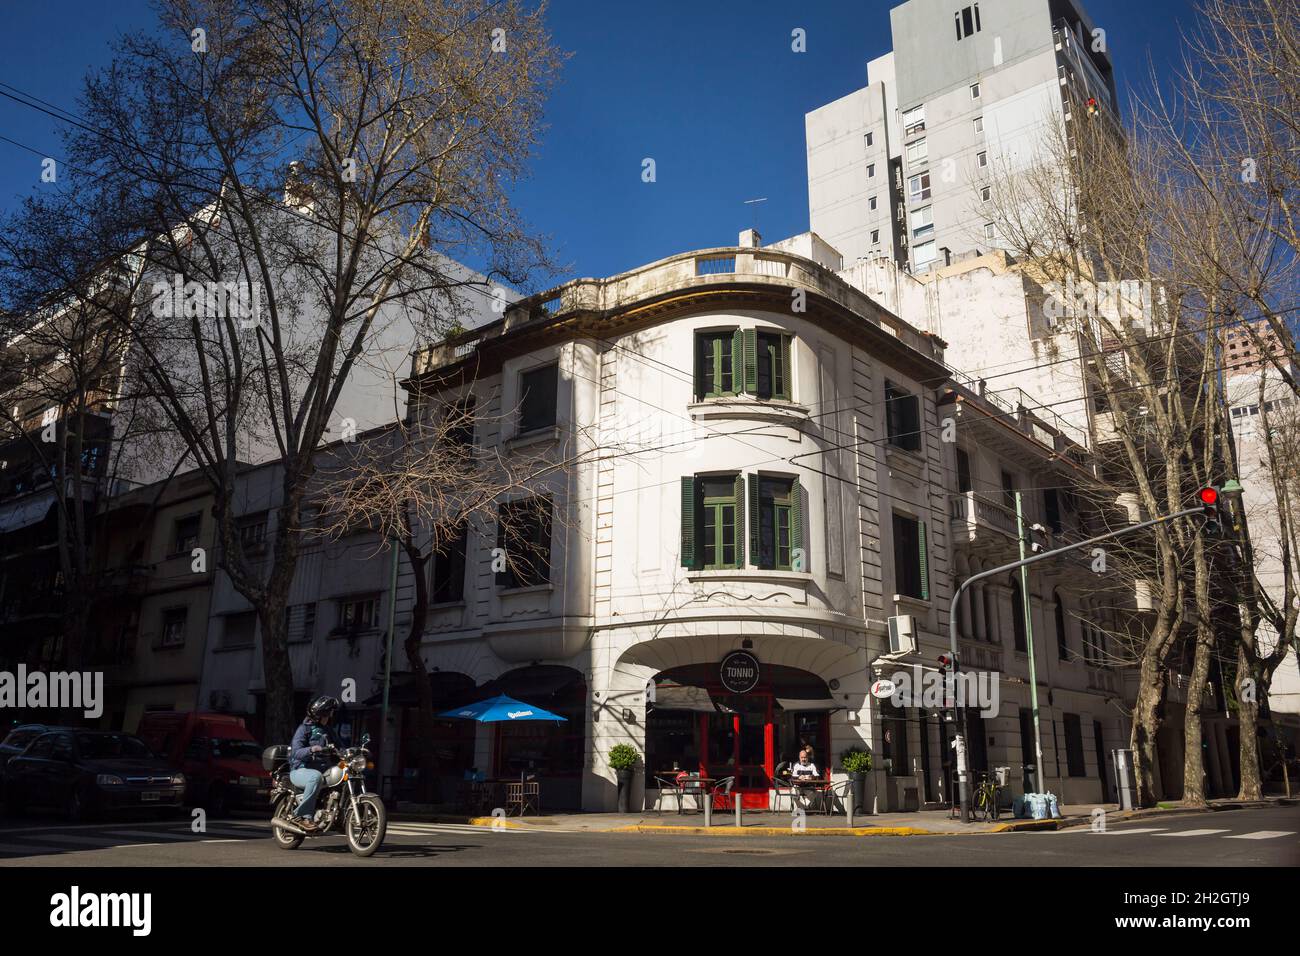 Horizontal view of a man riding a motorbike at Charcas St and Thames St crossing, Palermo neighborhood, Buenos Aires, Argentina Stock Photo